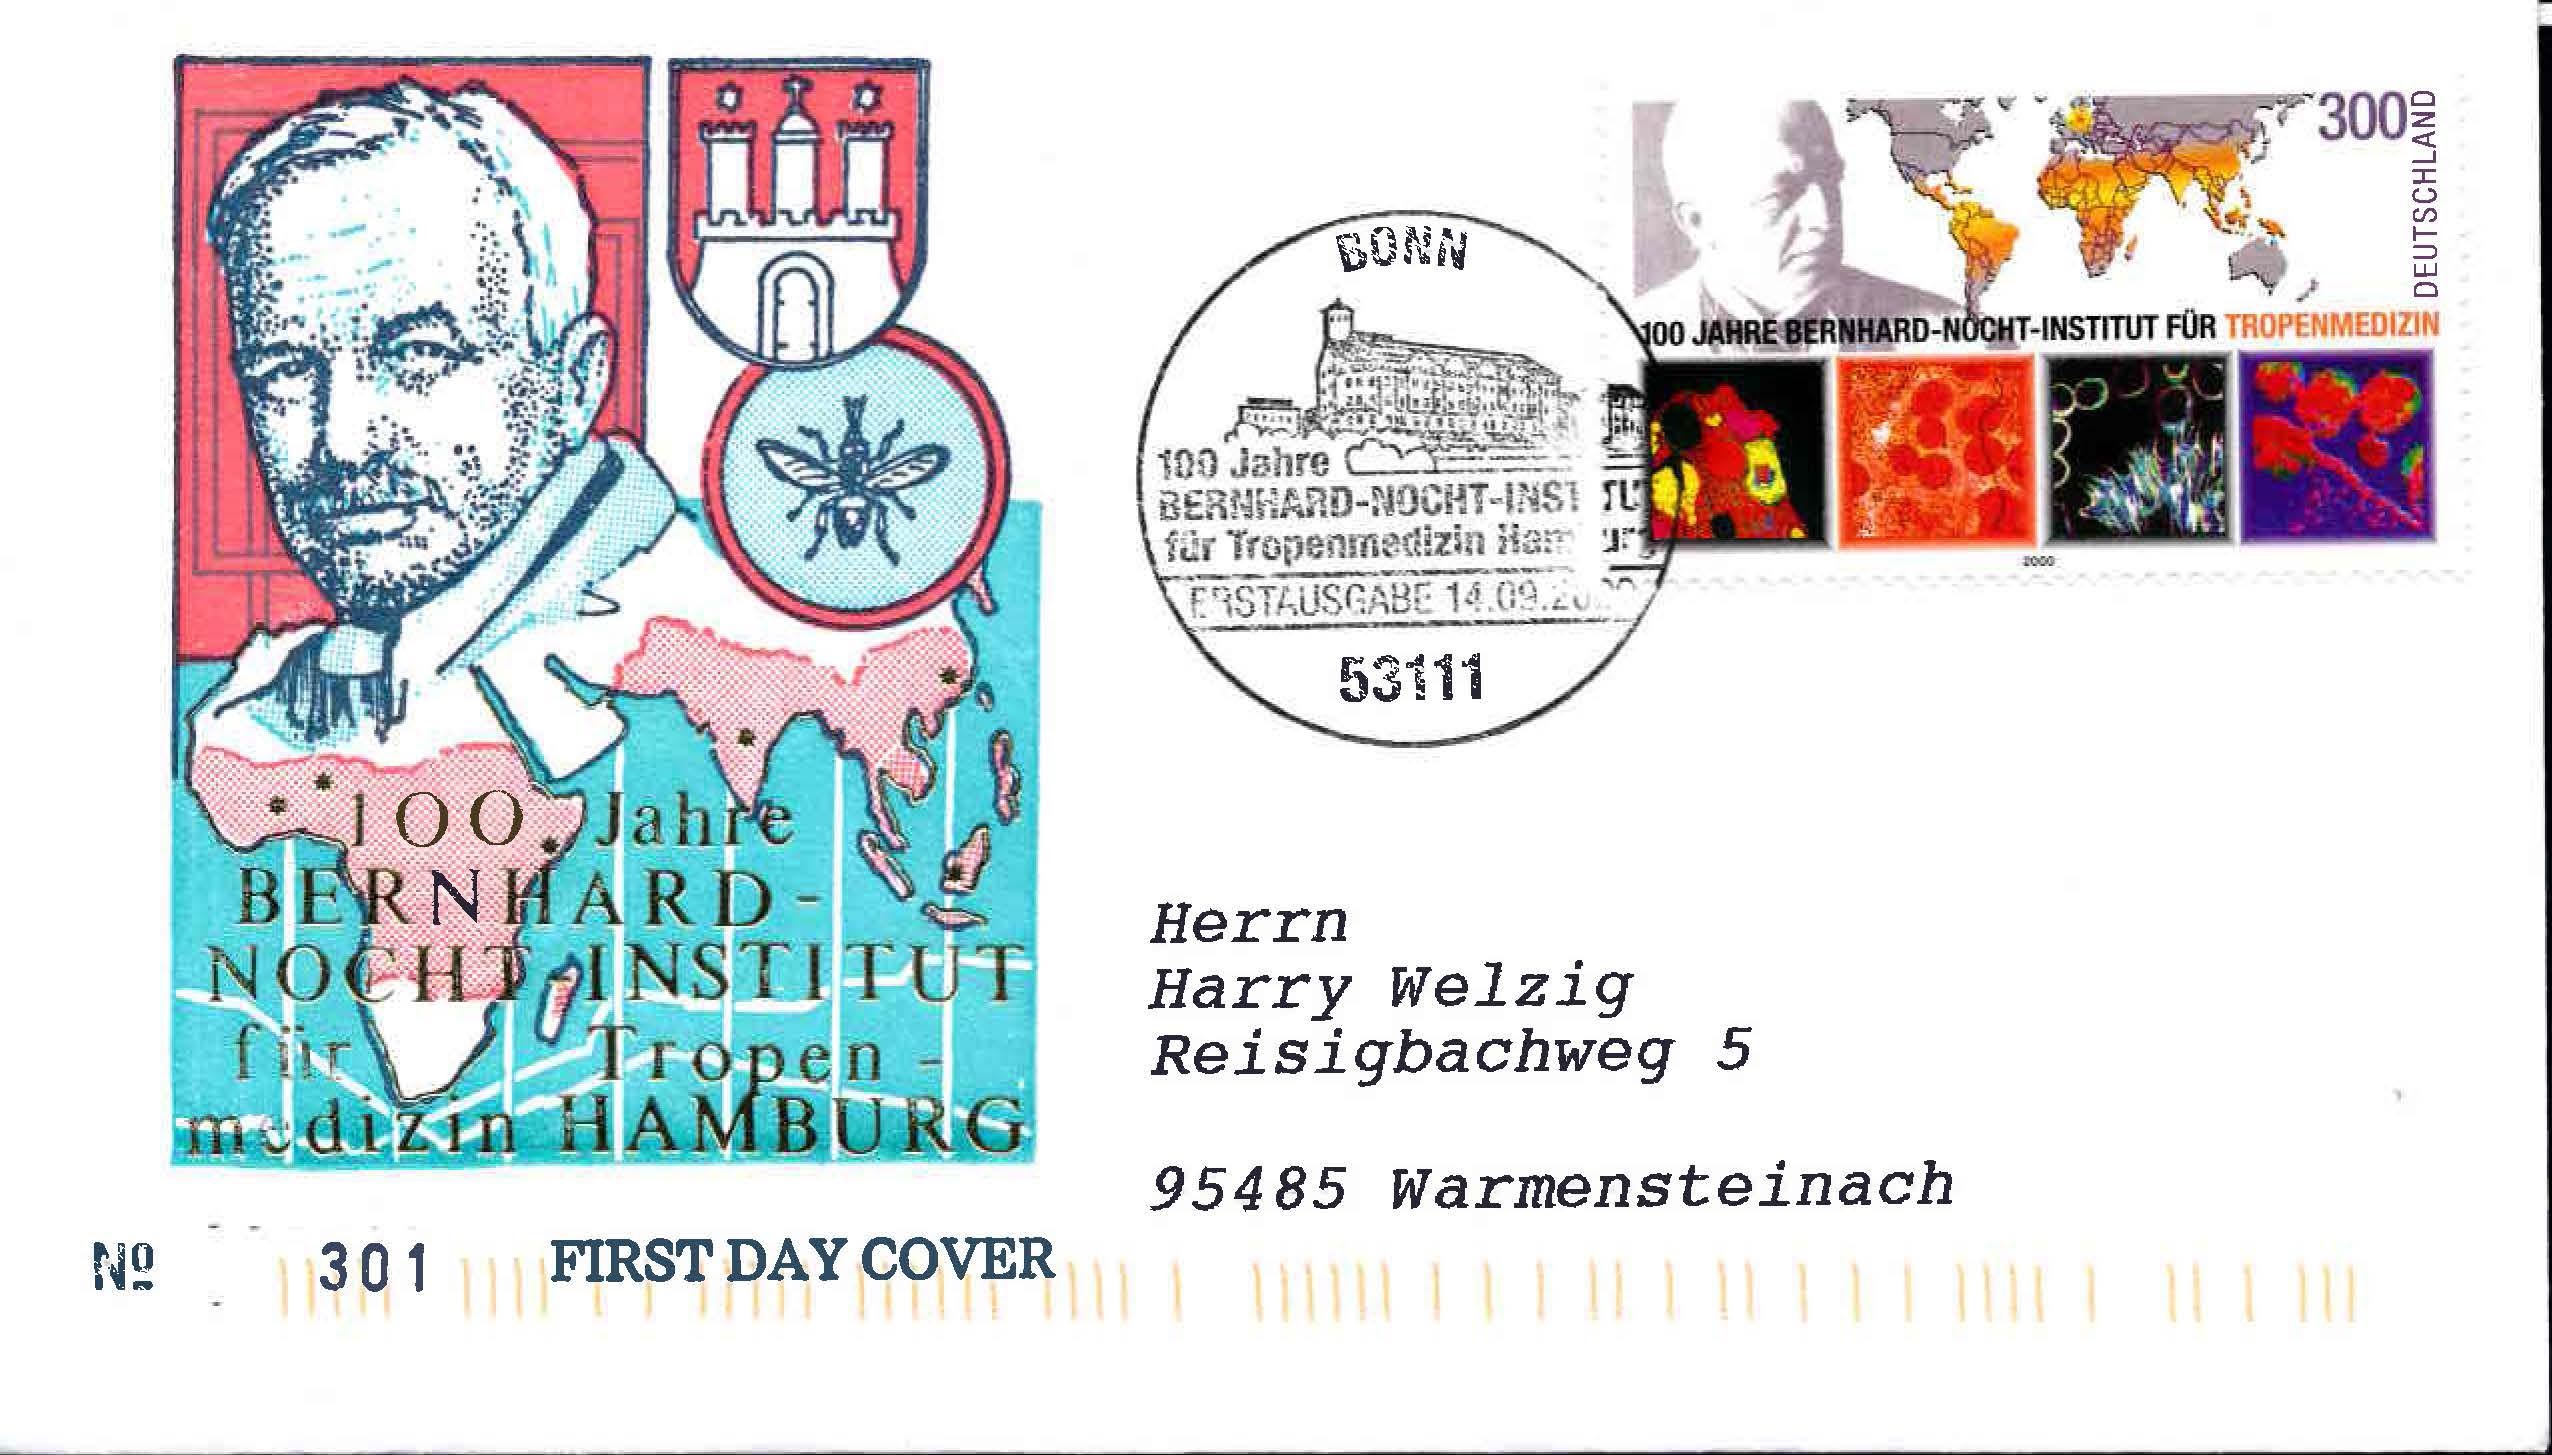 Germany Scott 2101 First Day Cover, Cachet 3, Bonn Cancellation - Sent Through the Mail to Warmensteinach